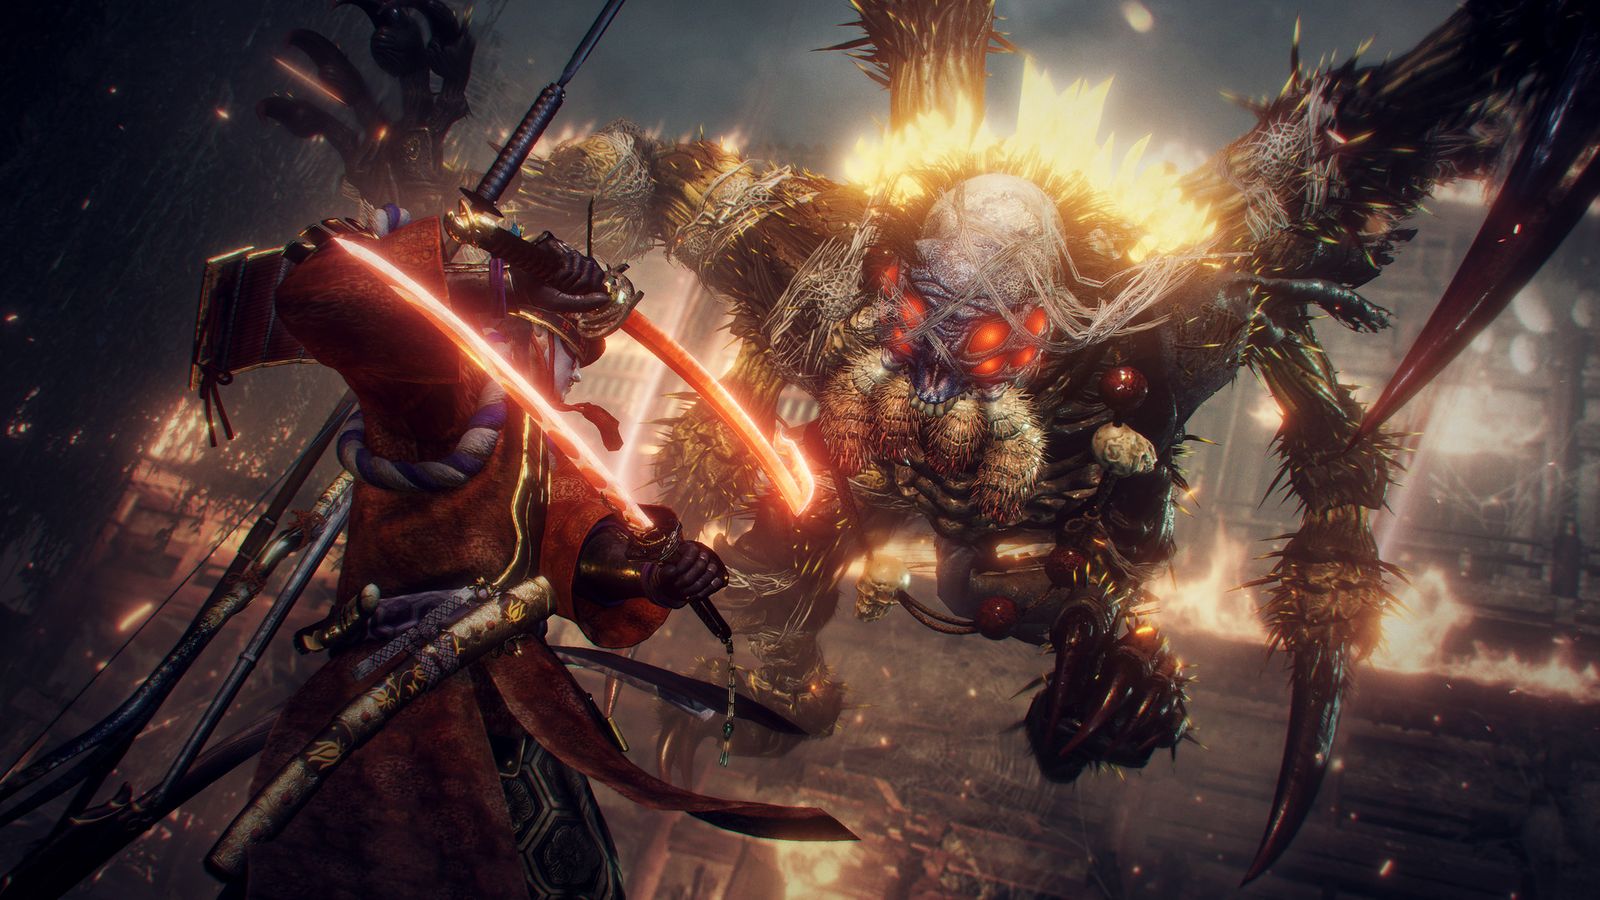 In-game image from Nioh 2 of a character fighting a spider-like monster using two orange swords.